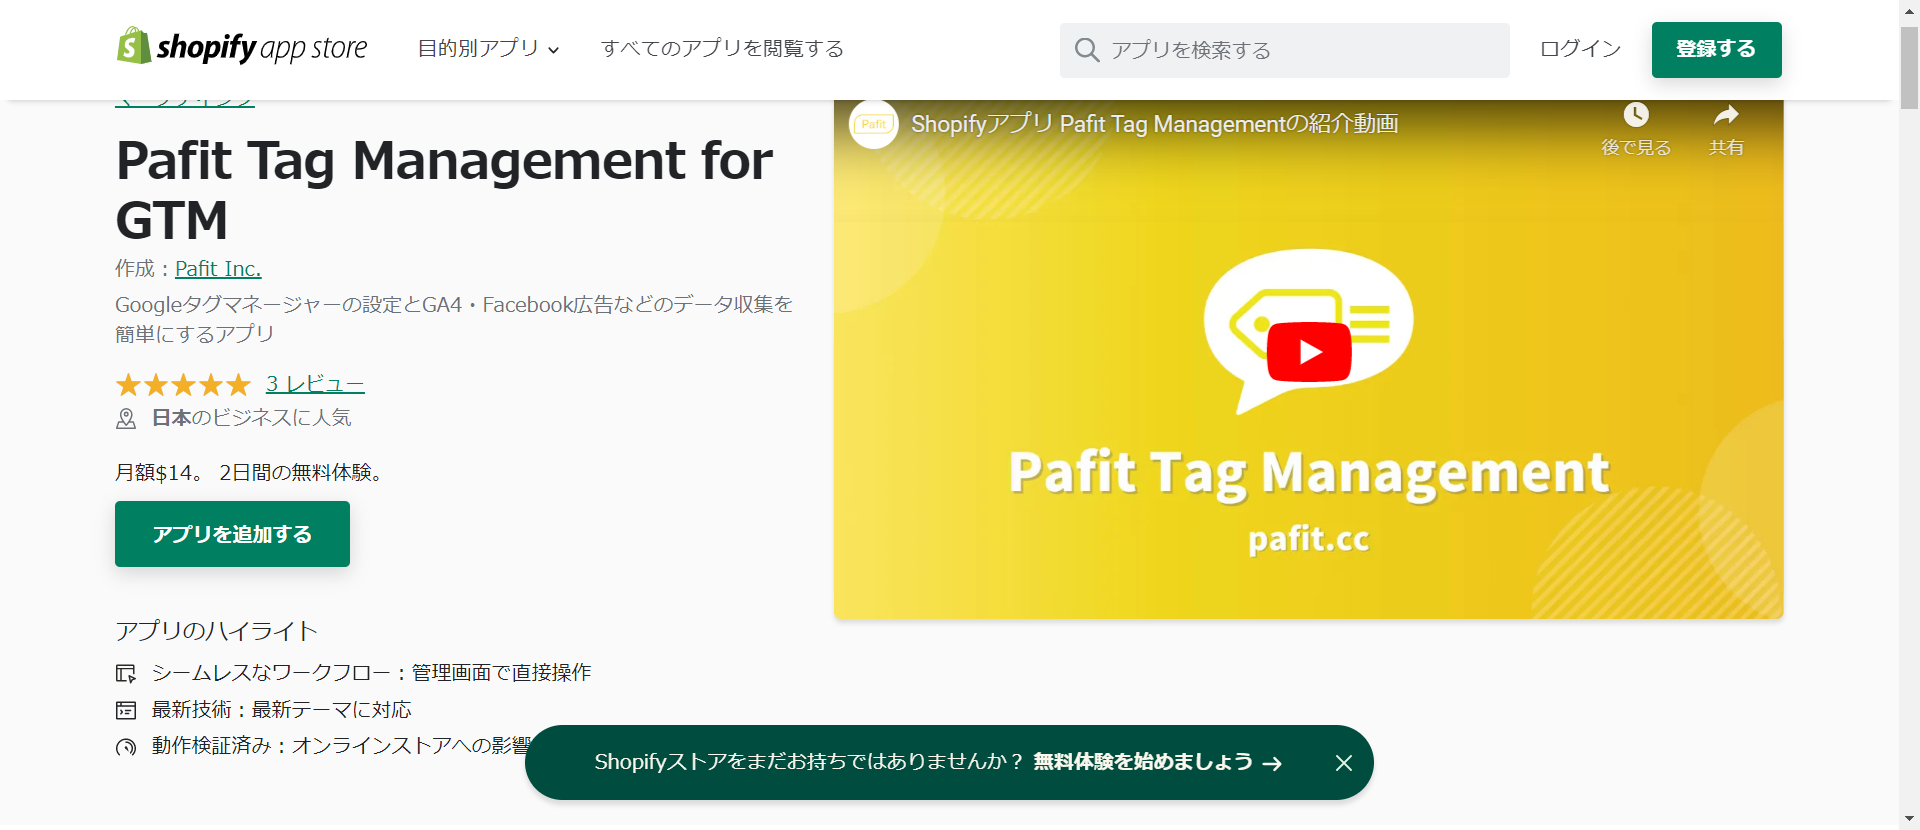 Pafit-Tag-Management-for-GTM